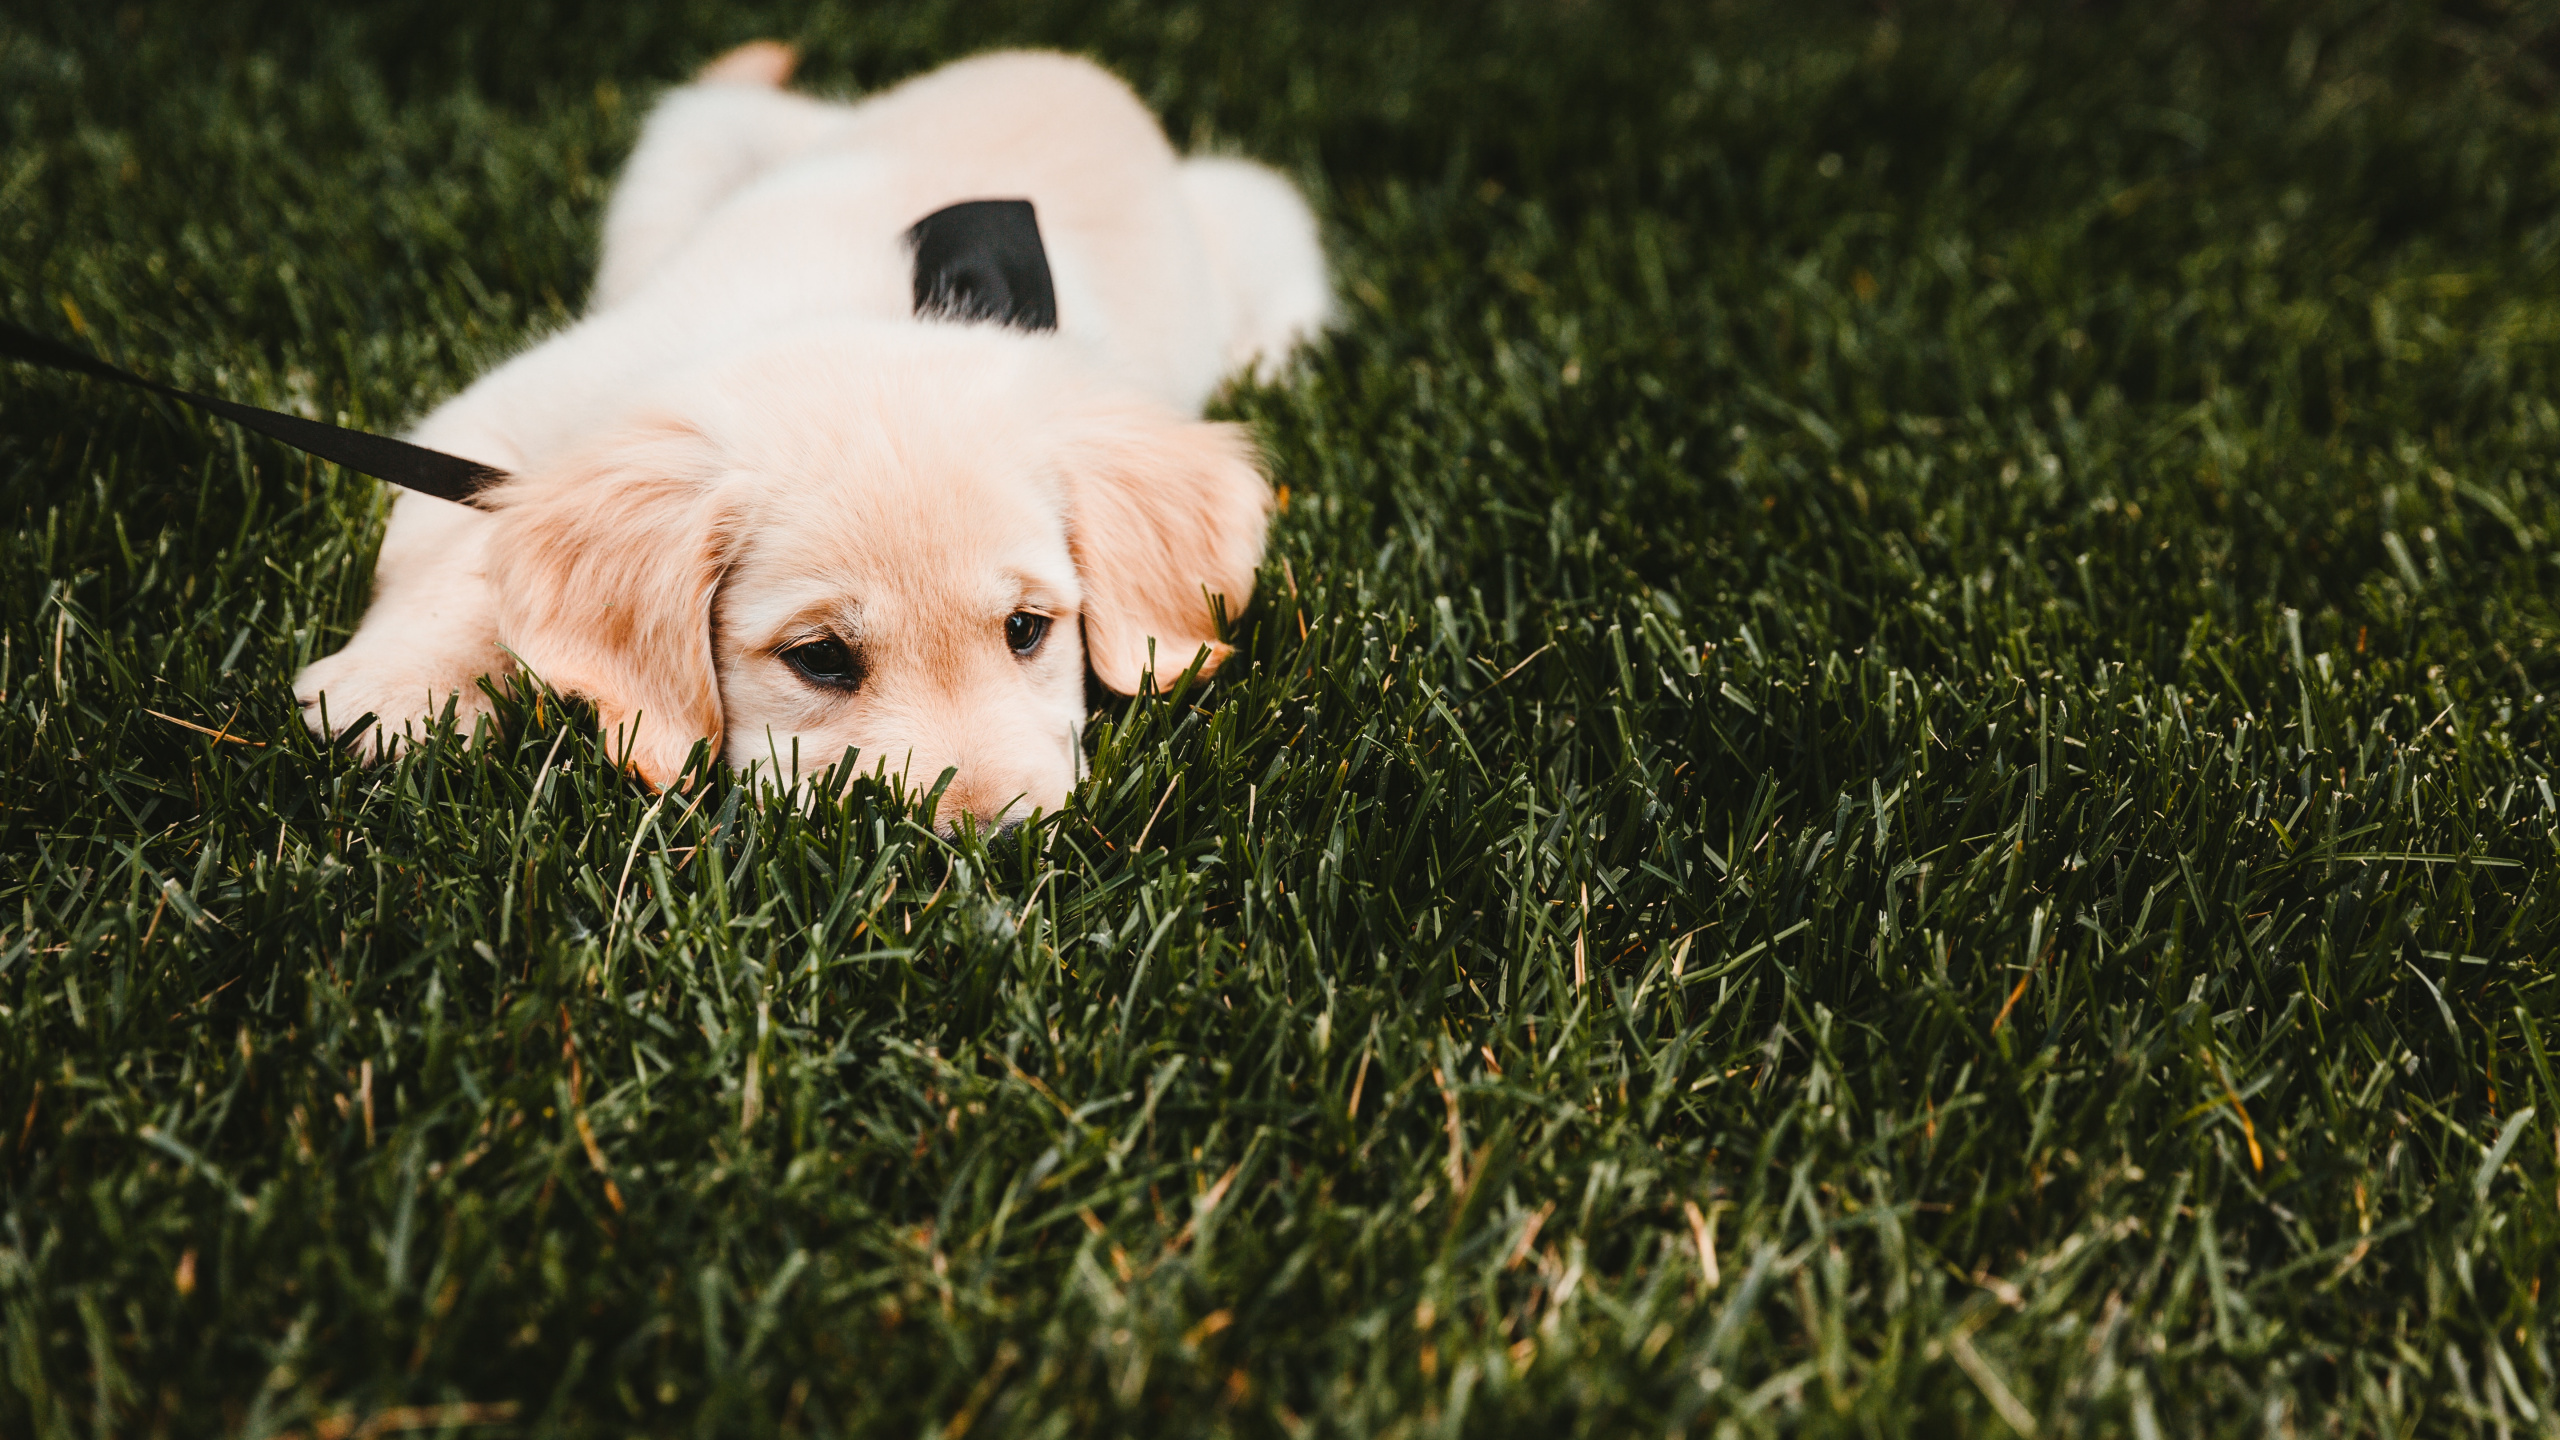 White Short Coated Dog Lying on Green Grass Field During Daytime. Wallpaper in 2560x1440 Resolution